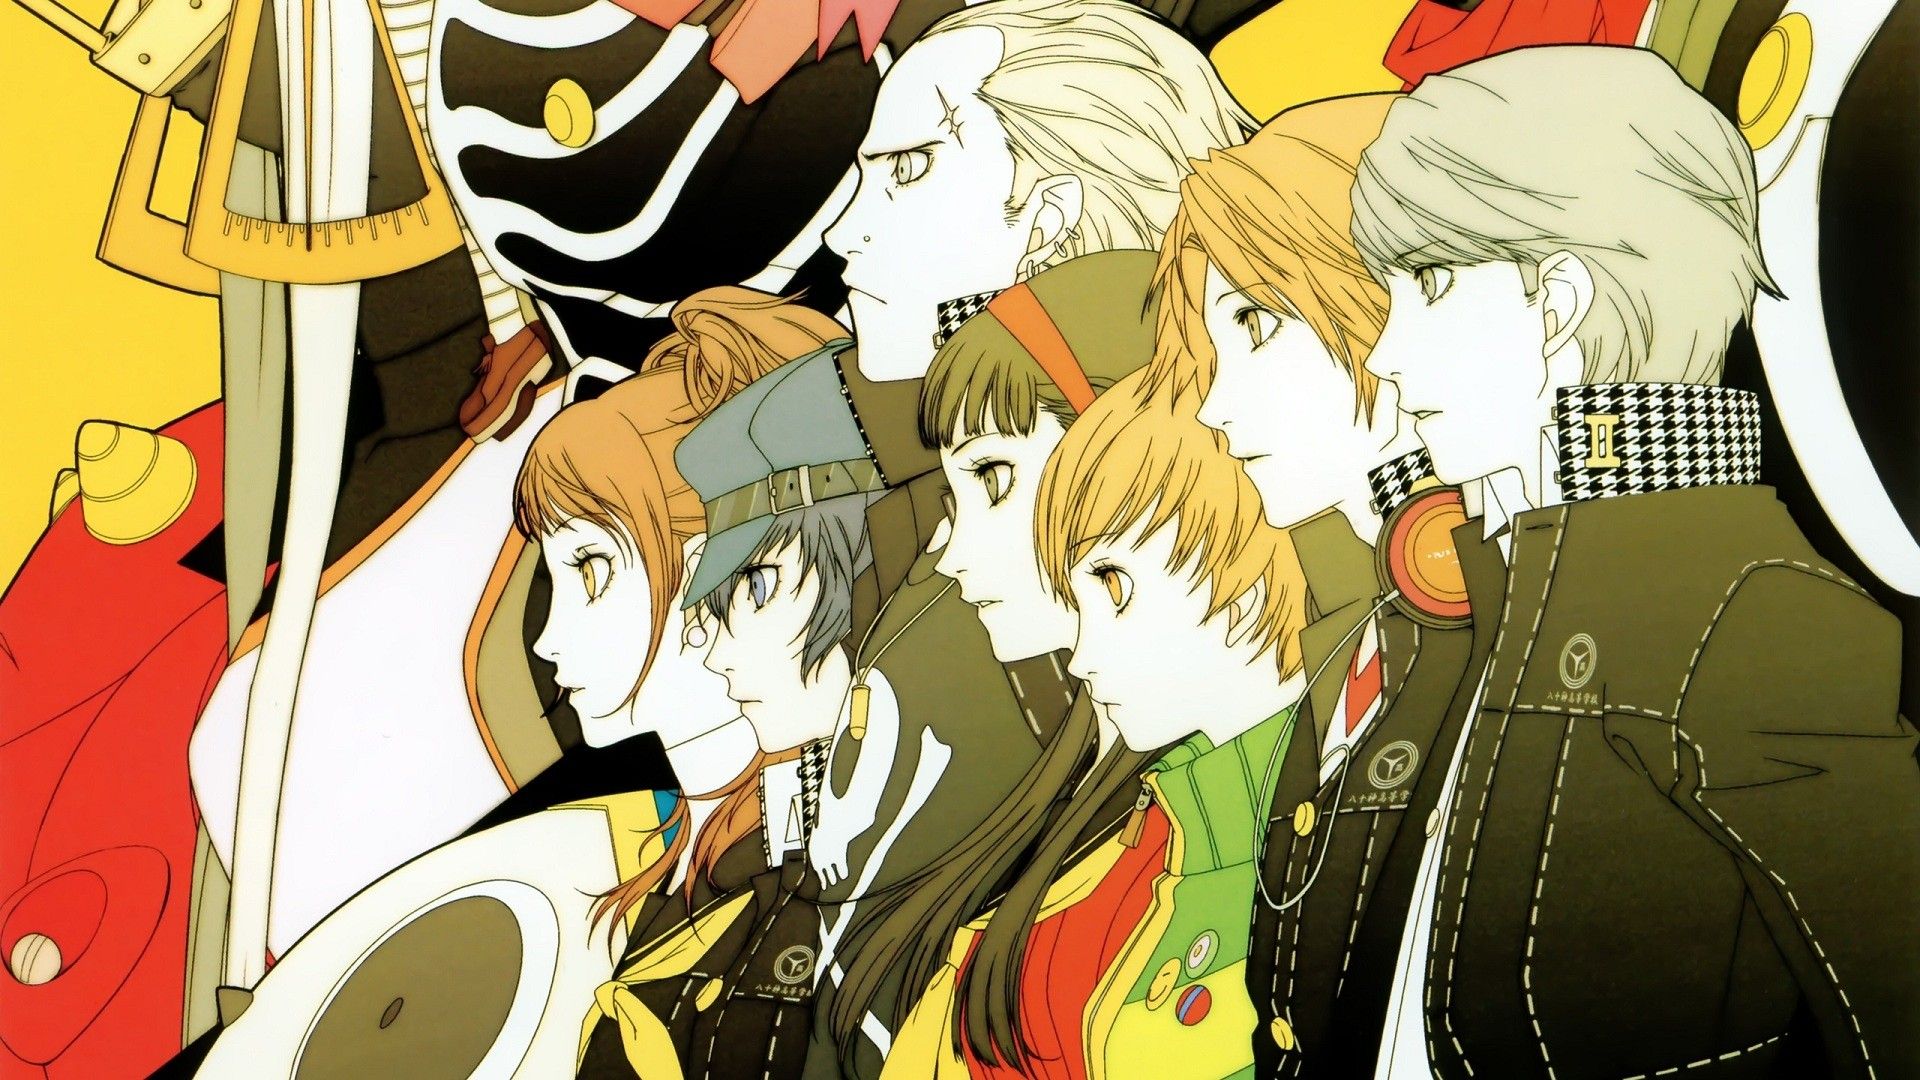 Tested: Persona 4 Golden's PC port looks sharp and even runs on integrated graphics